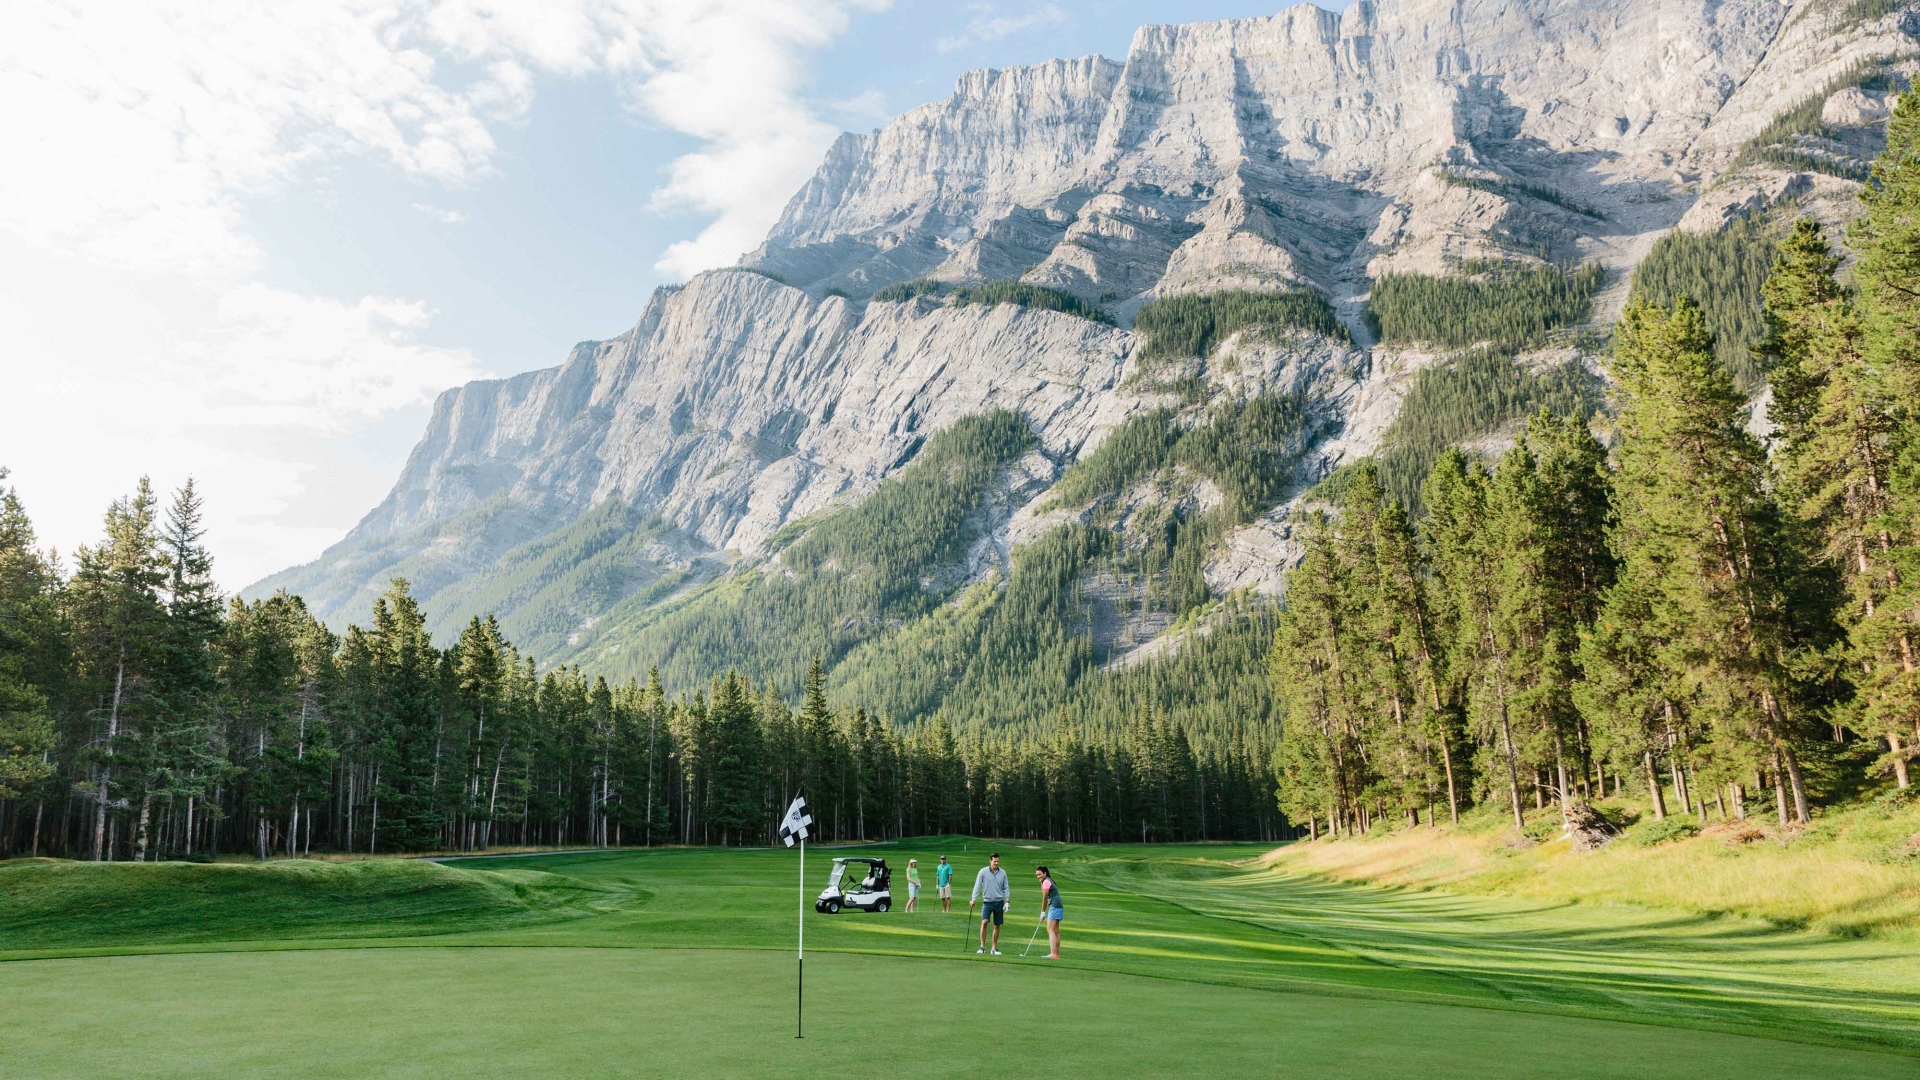 Golfers on Banff Springs Golf Course in Banff National Park